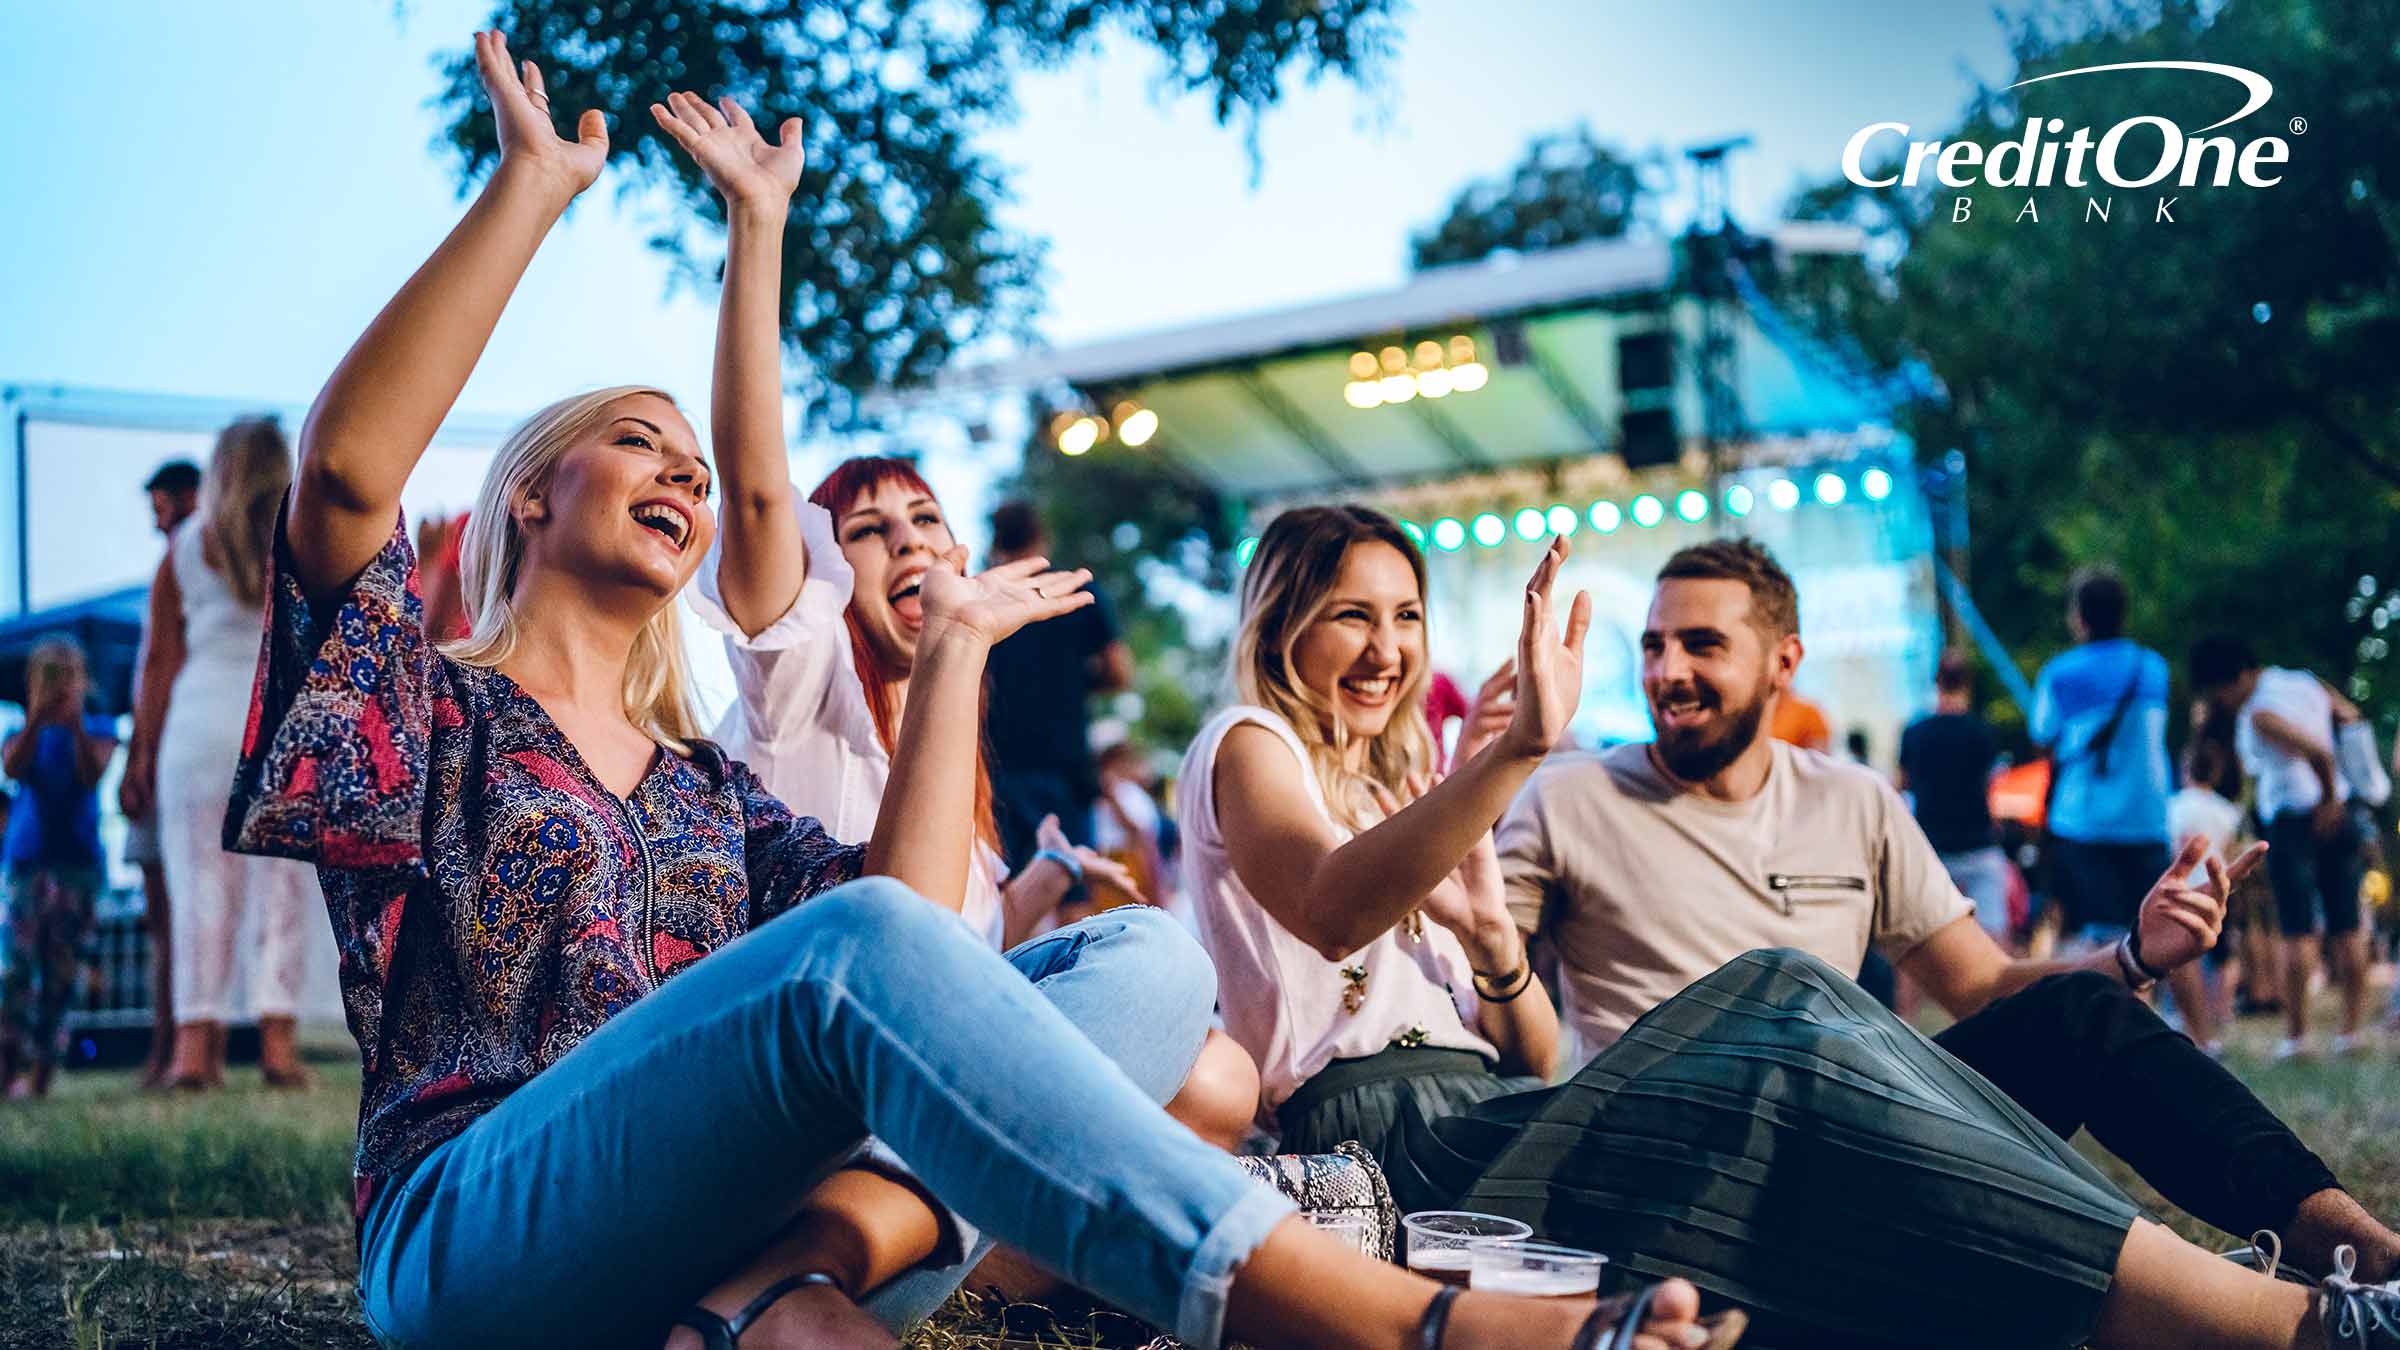 Several friends enjoy a music festival while earning perks from their entertainment rewards credit card